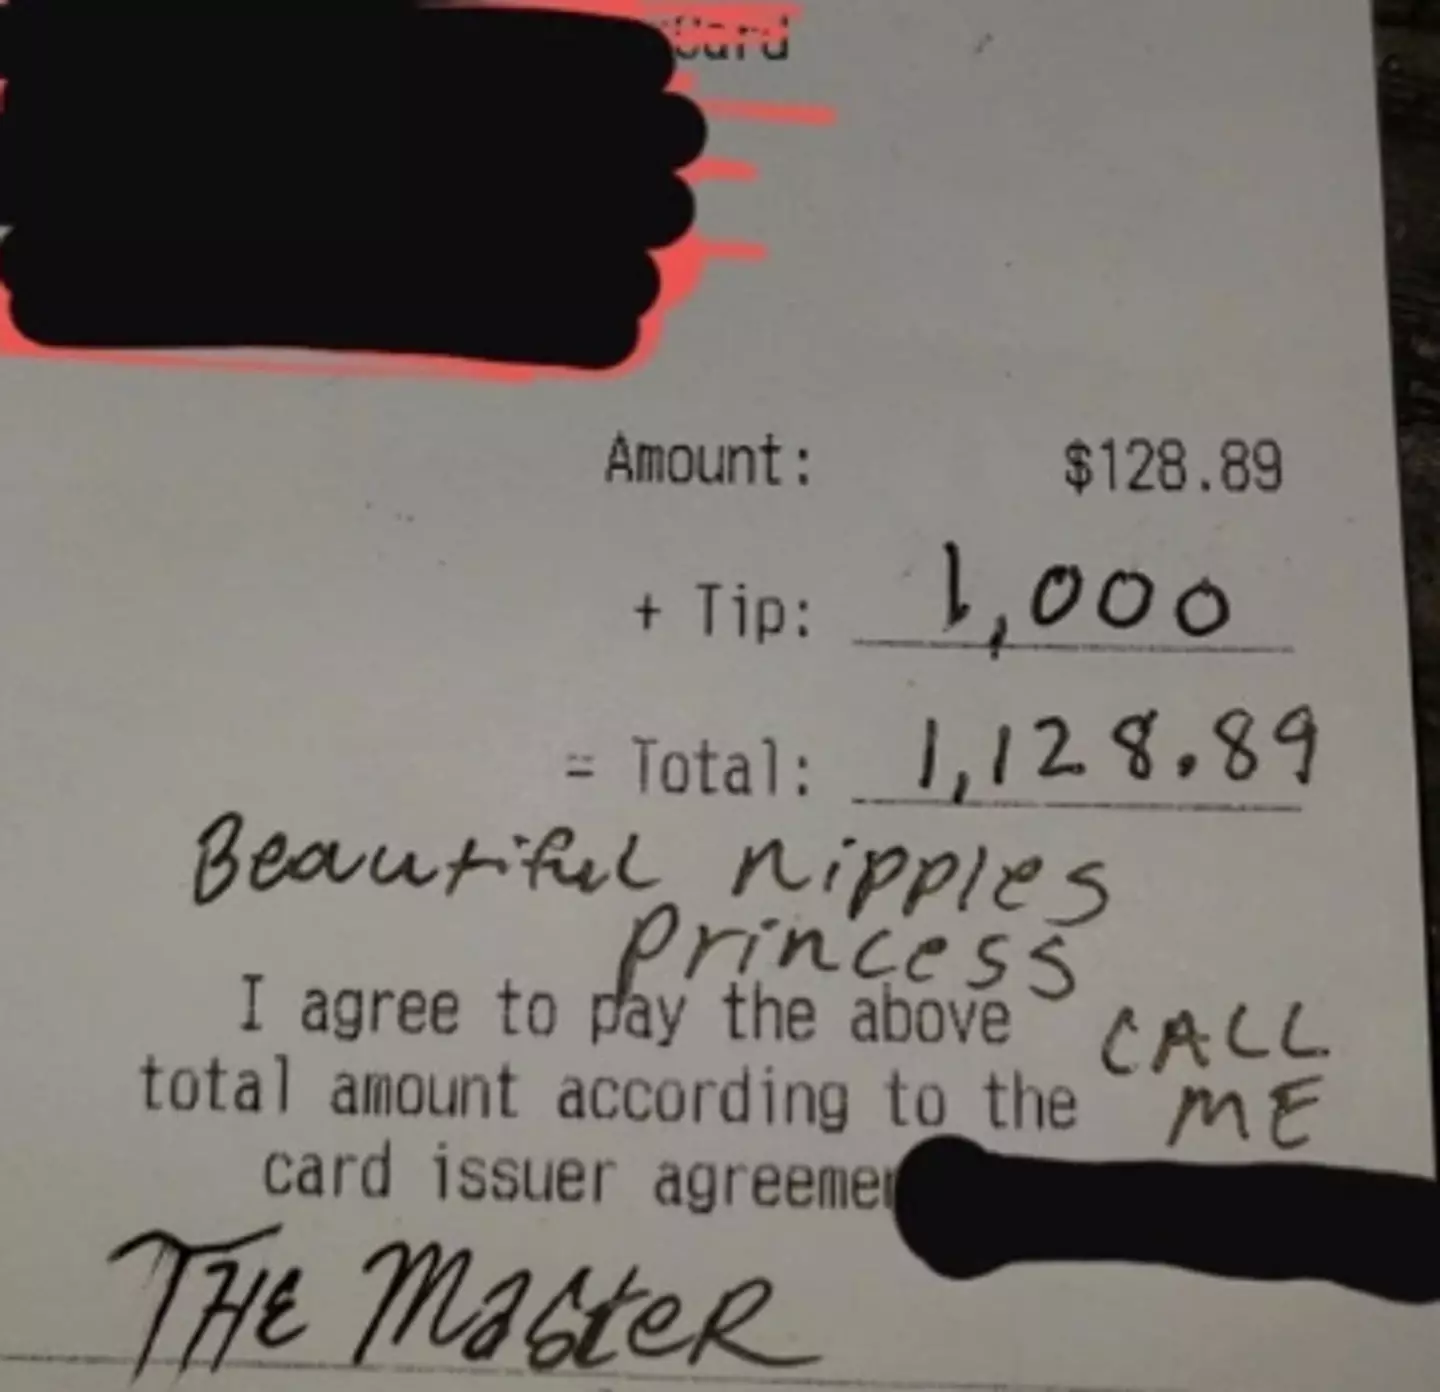 The tip was majorly creepy (